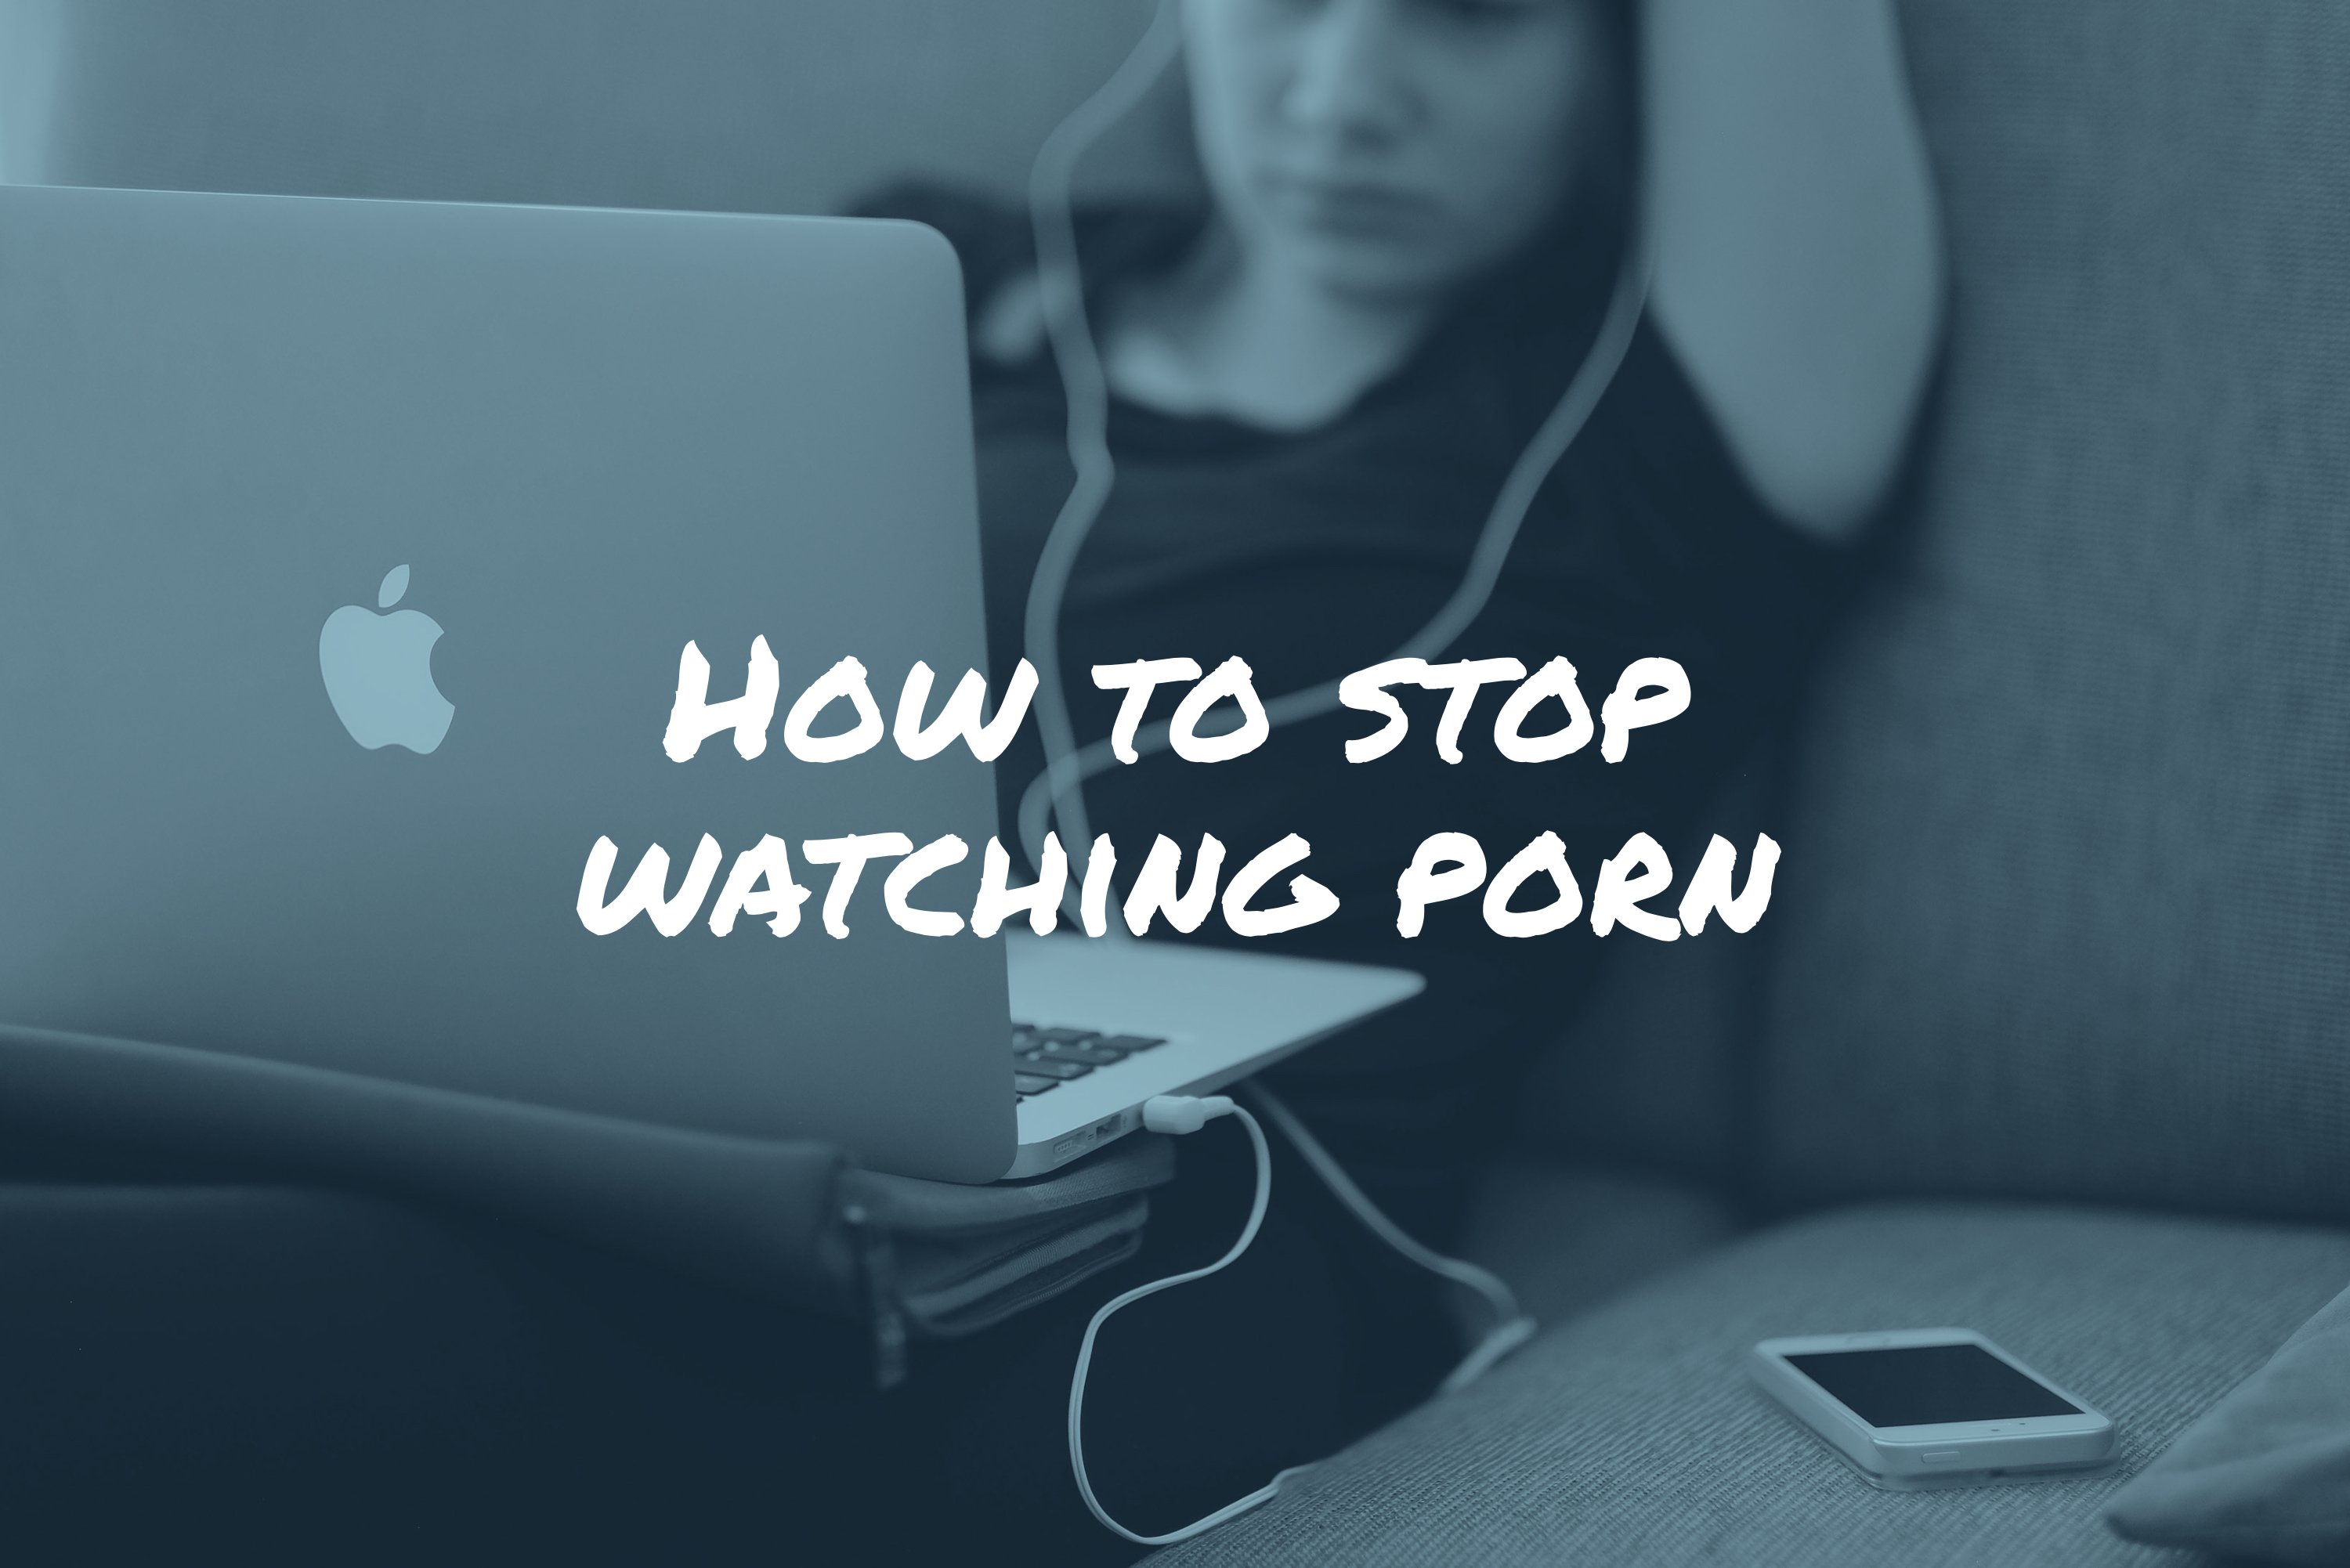 Group watching porn